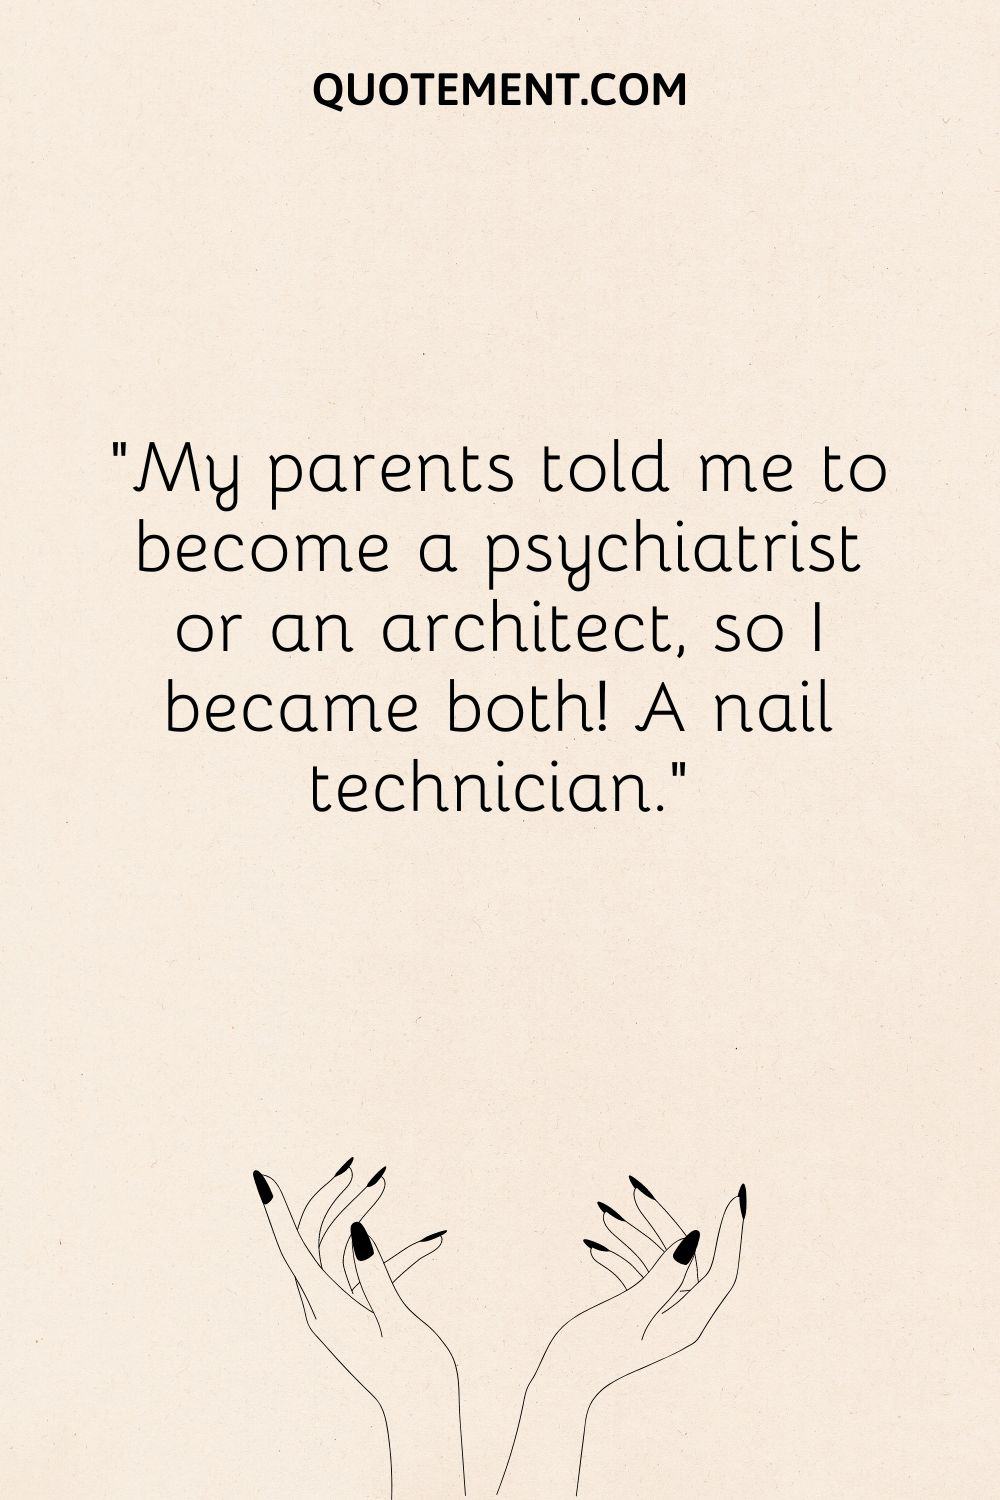 My parents told me to become a psychiatrist or an architect, so I became both! A nail technician